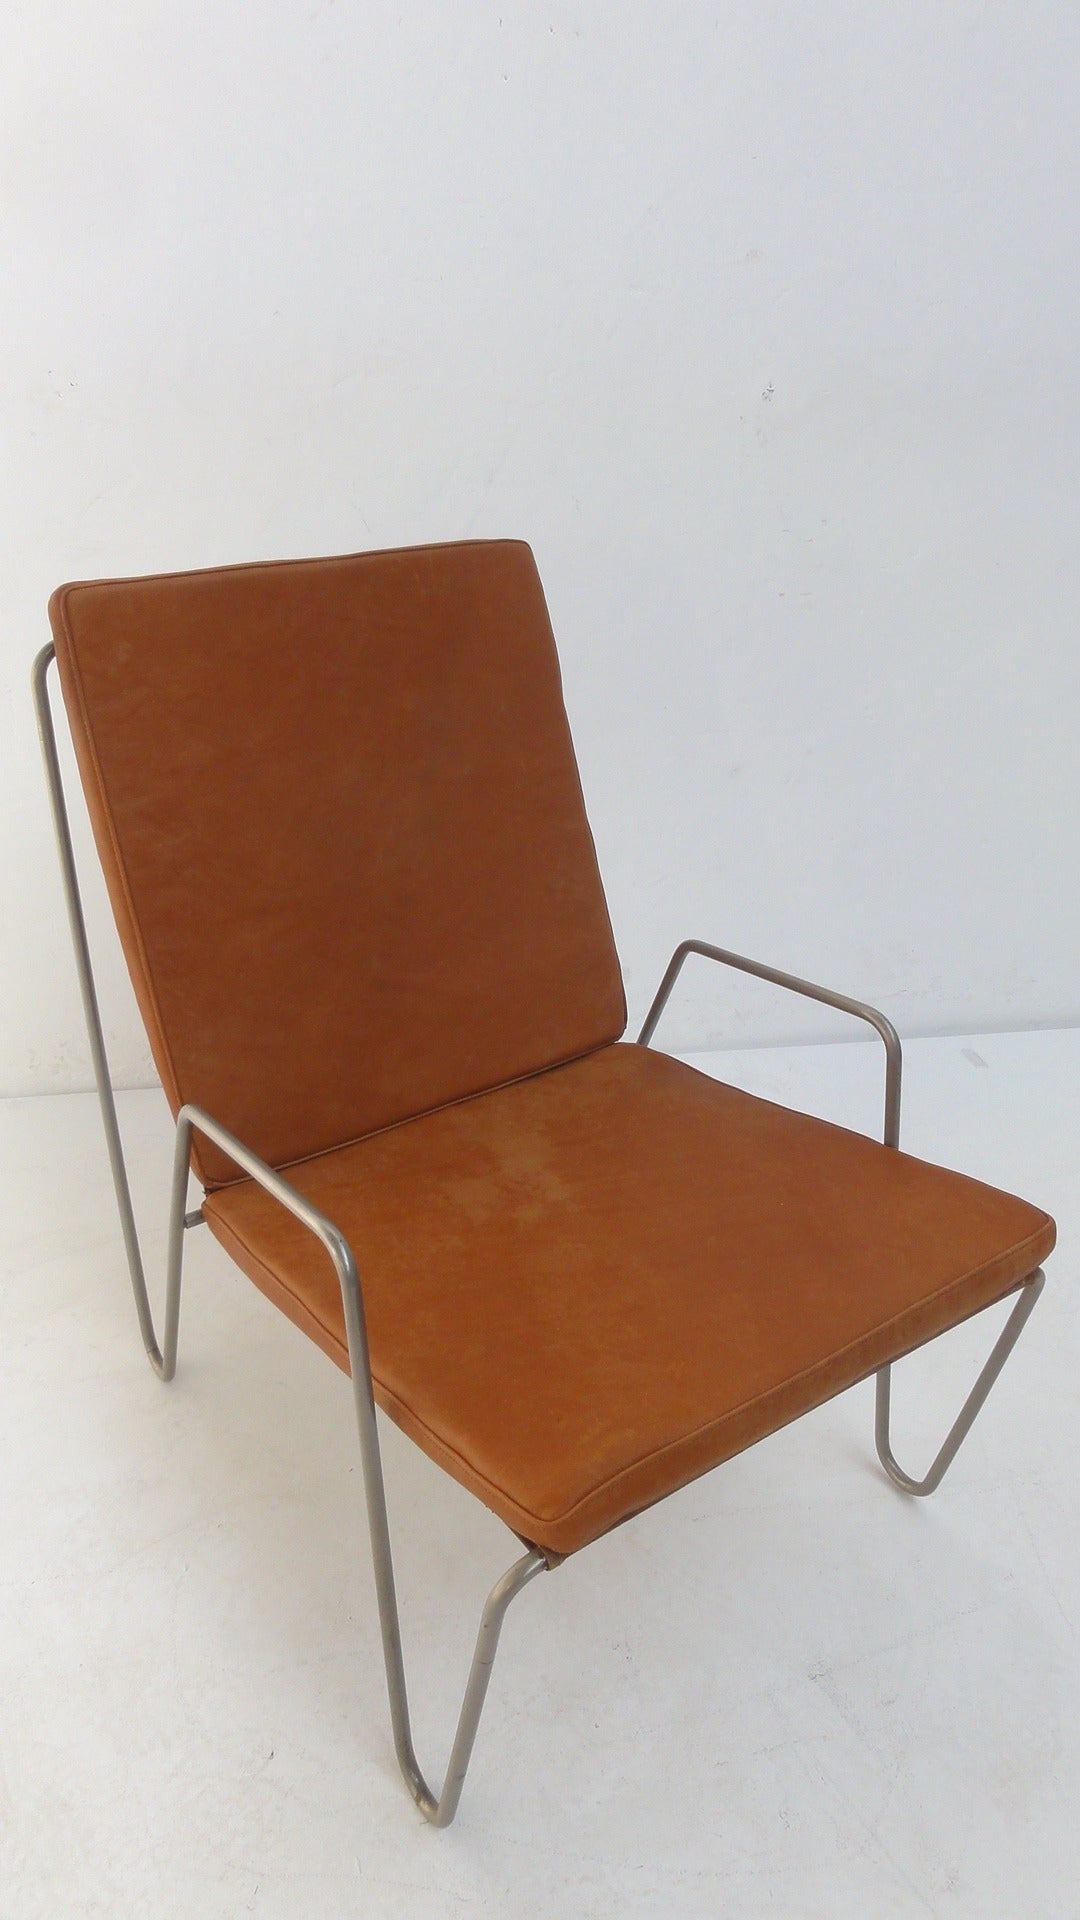 Plated Verner Panton Early Edition Bachelor Armchair Canvas, Steel and Leather, Denmark